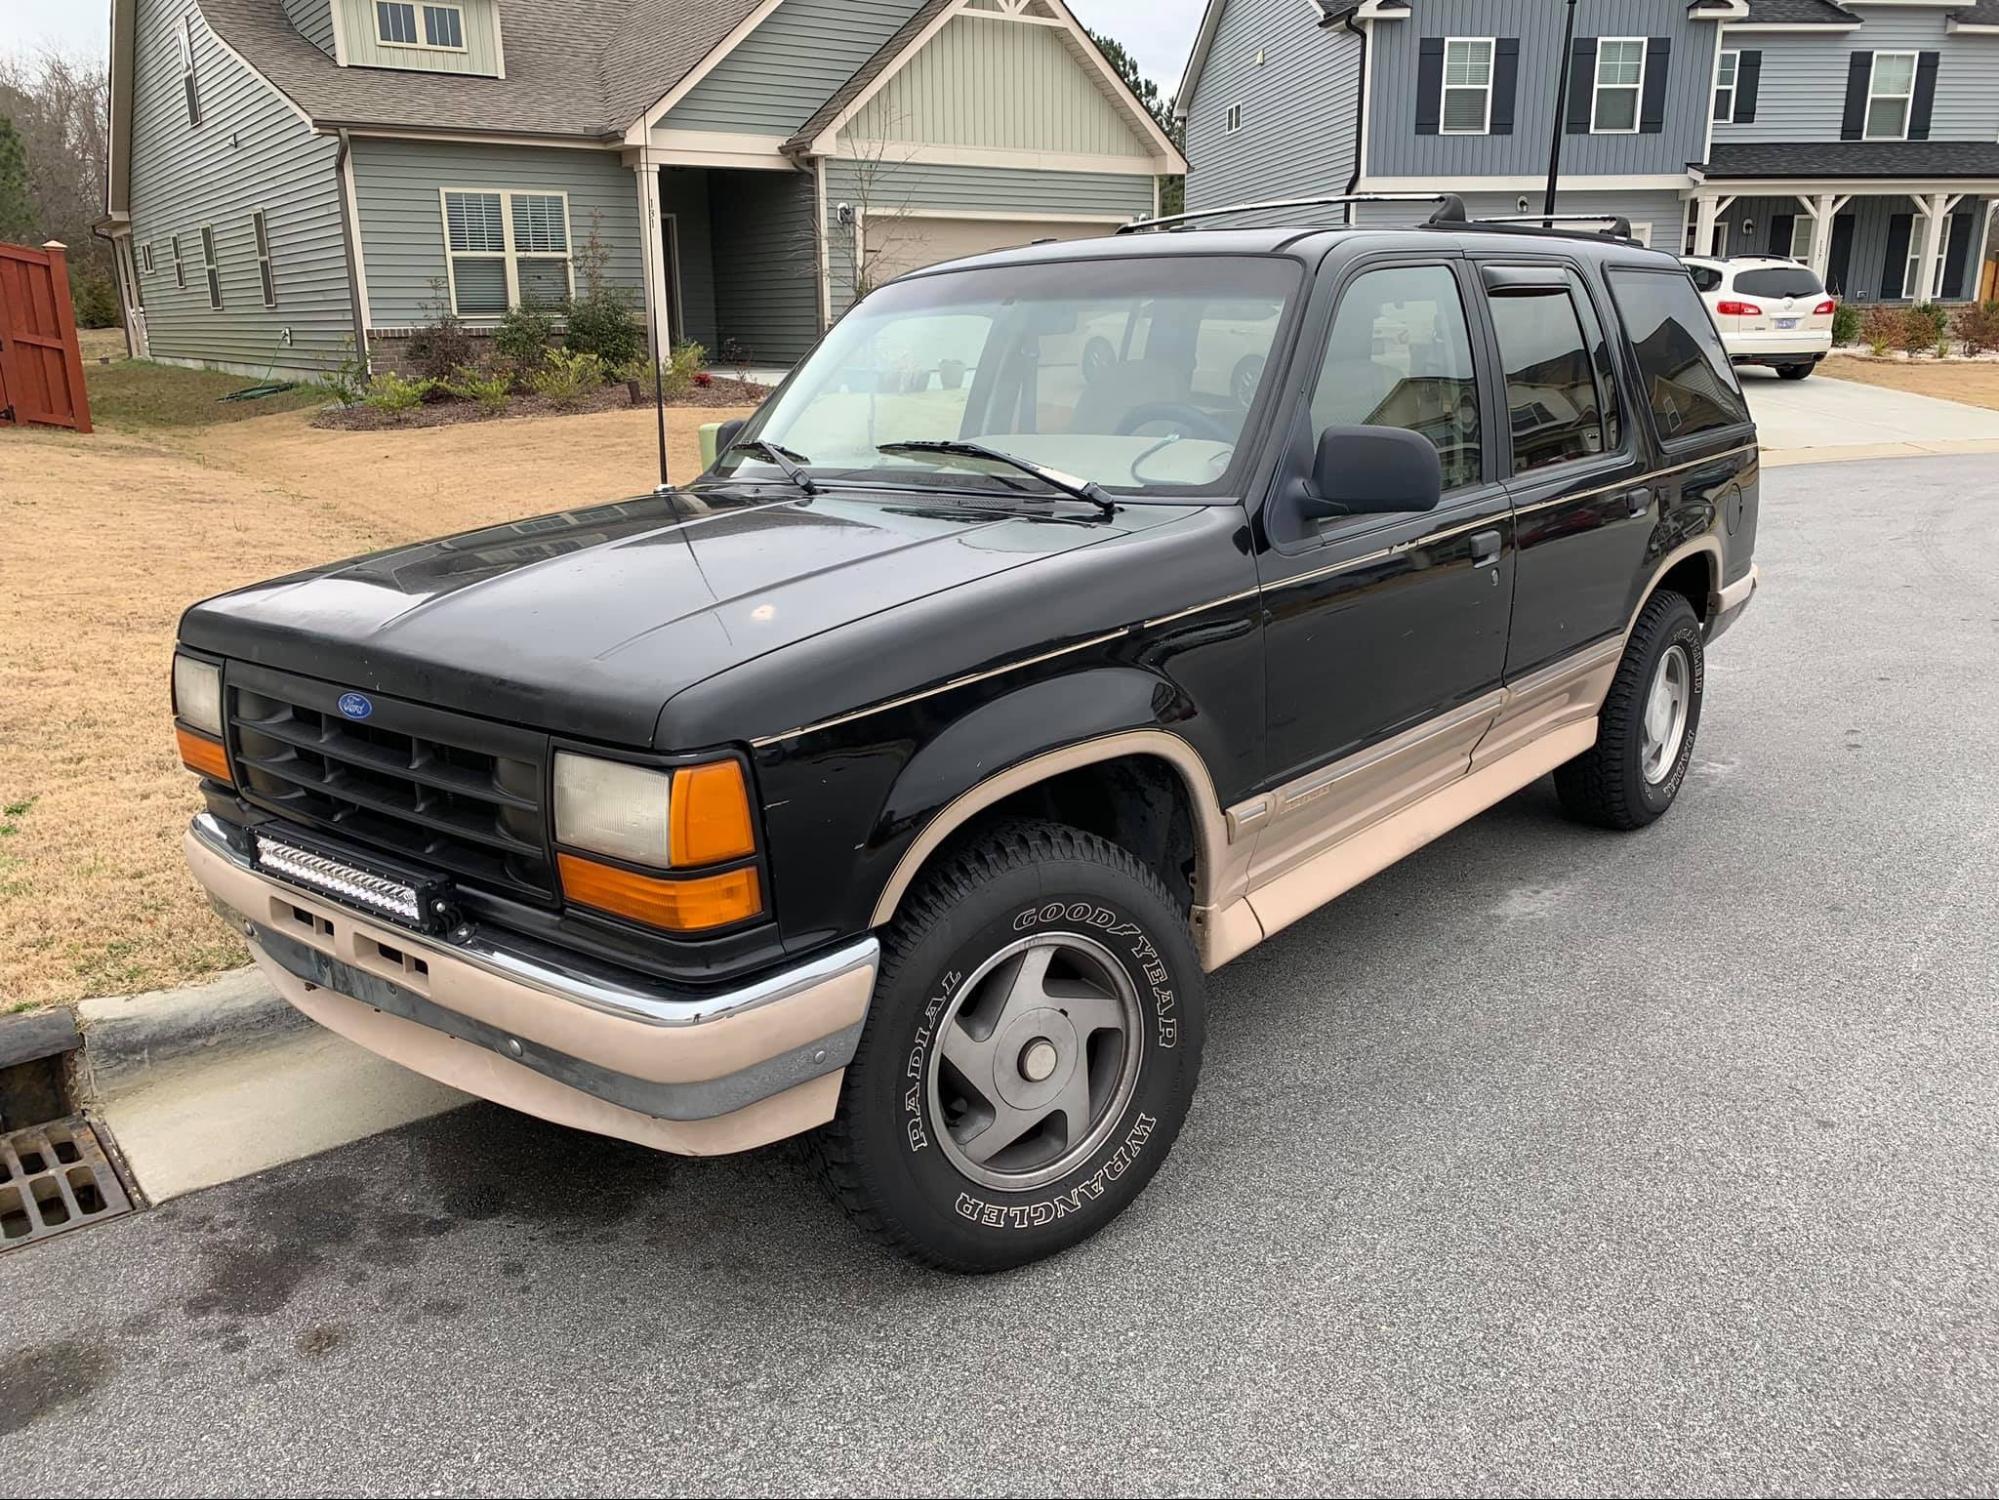 Pictured: 1993 Ford Explorer, total price: $1200